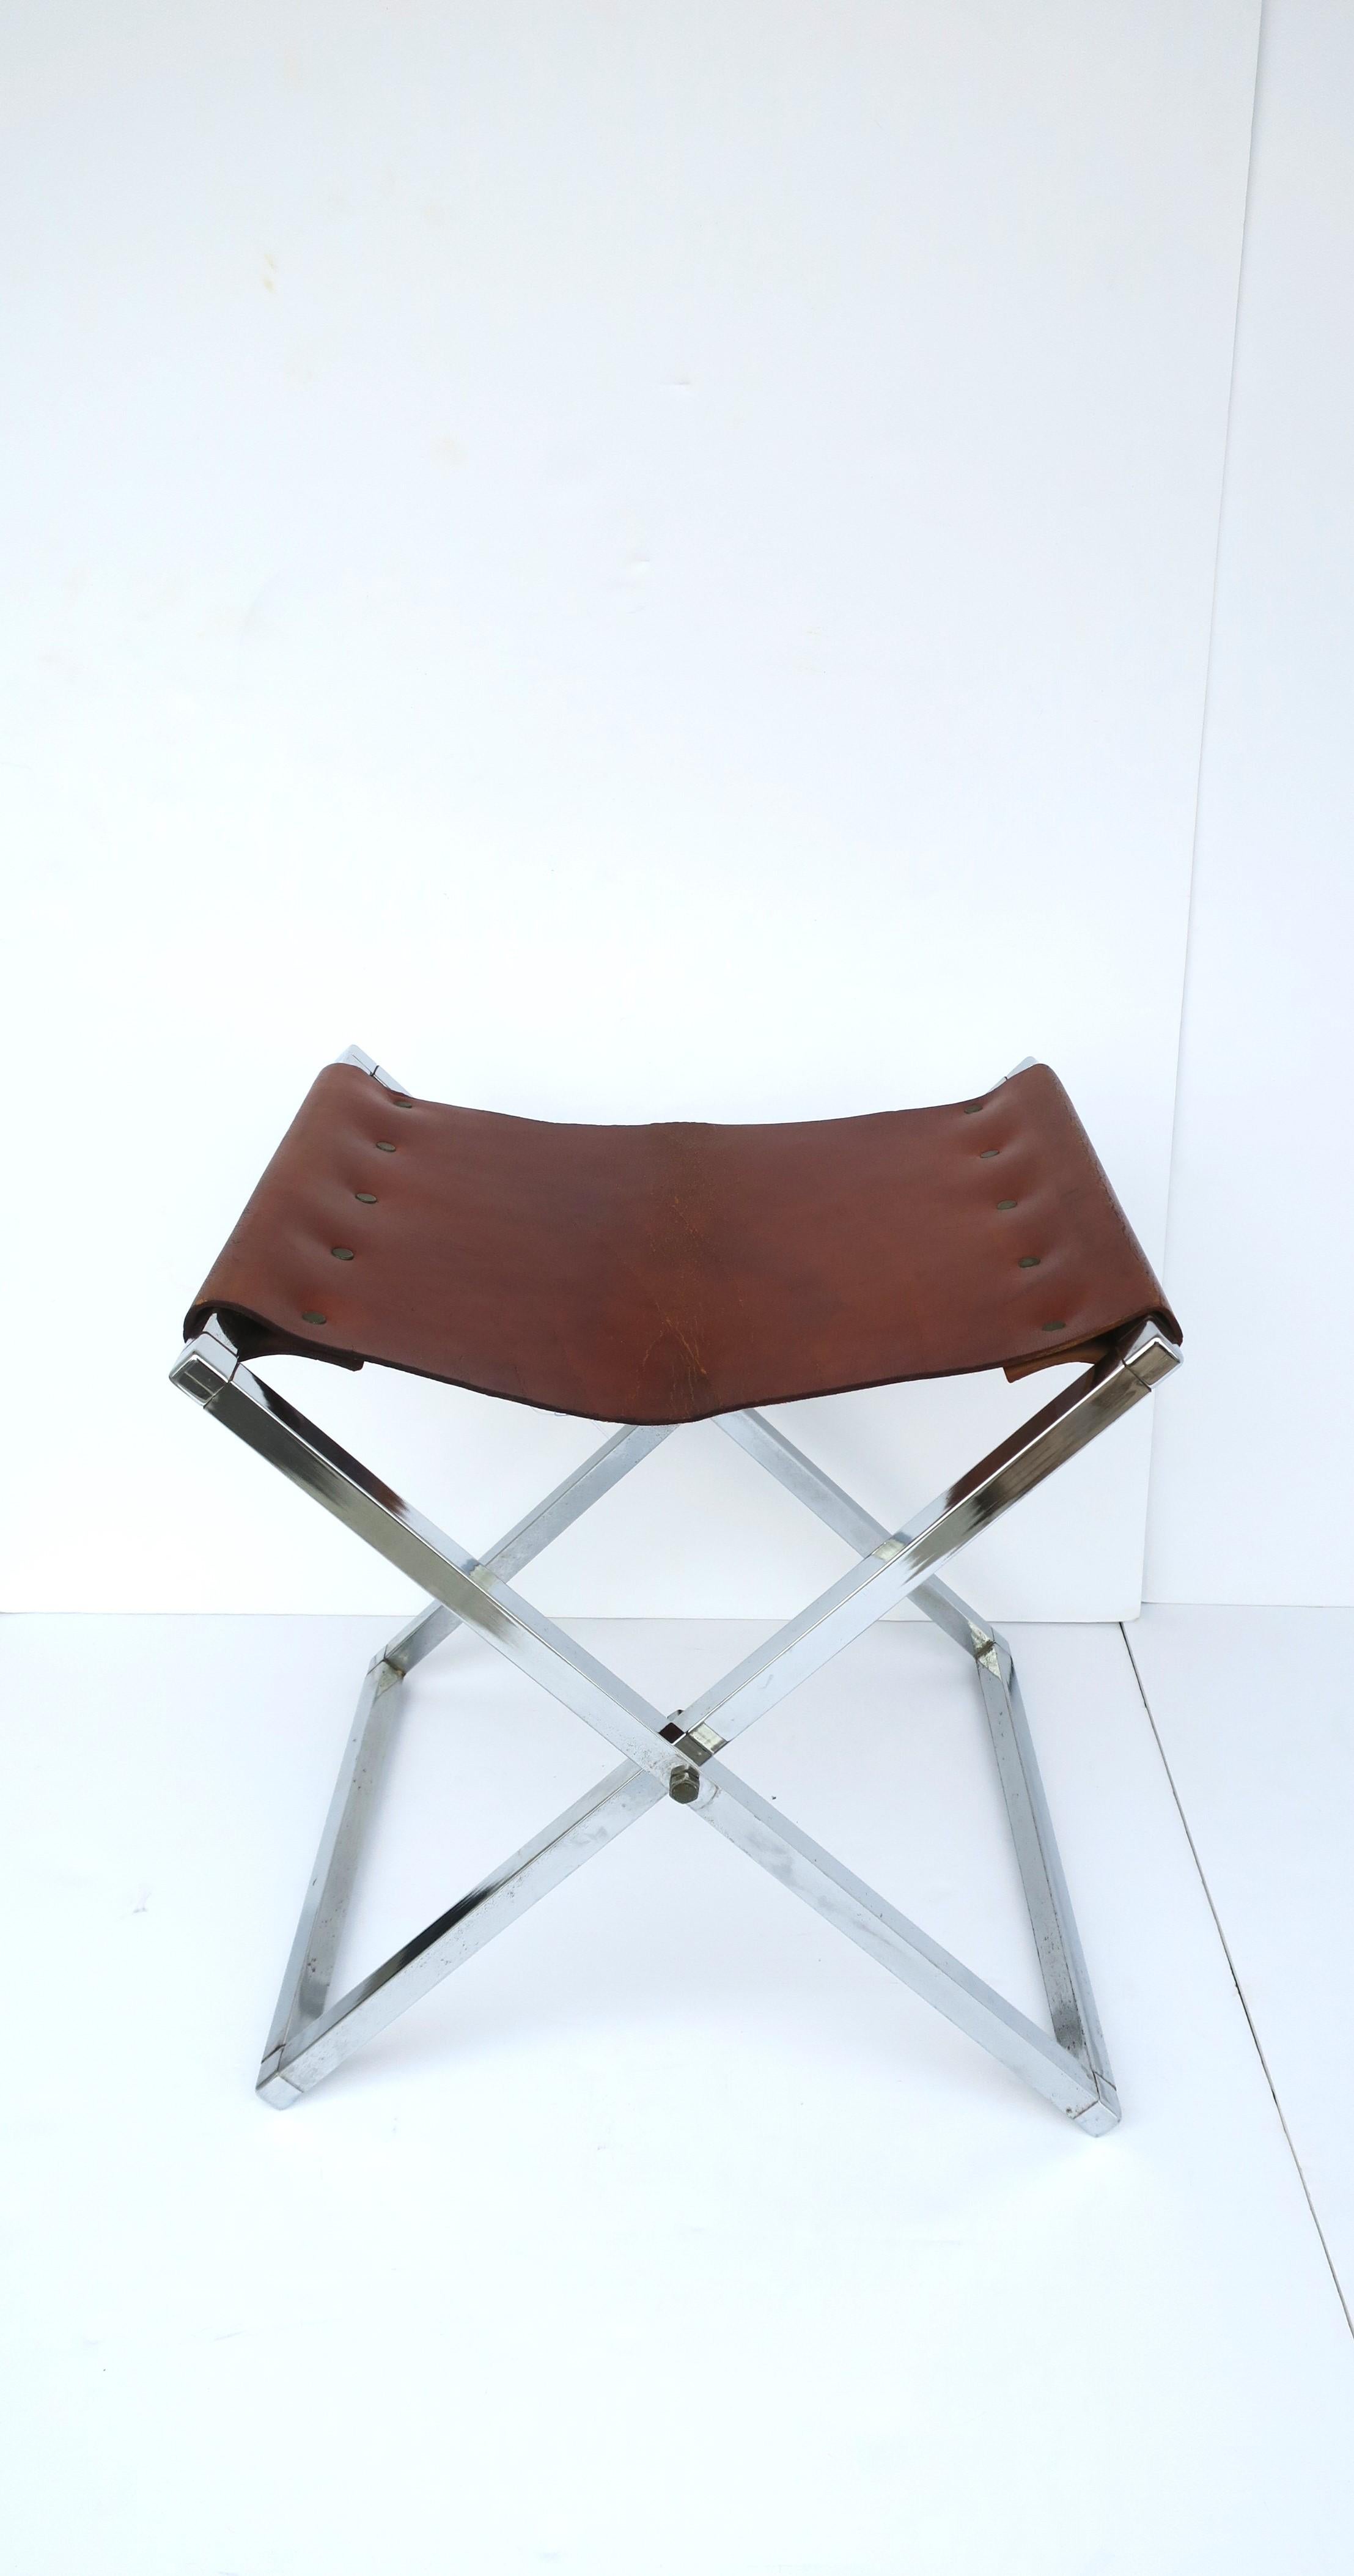 A well-made leather and chrome 'X' bench or stool, in the campaign modern style, circa 1970s. Stool/bench seat has a brown leather top (brown leather with red-ish undertones), brass detail and an 'X' chrome frame. Frame is a niece weight. Great as a